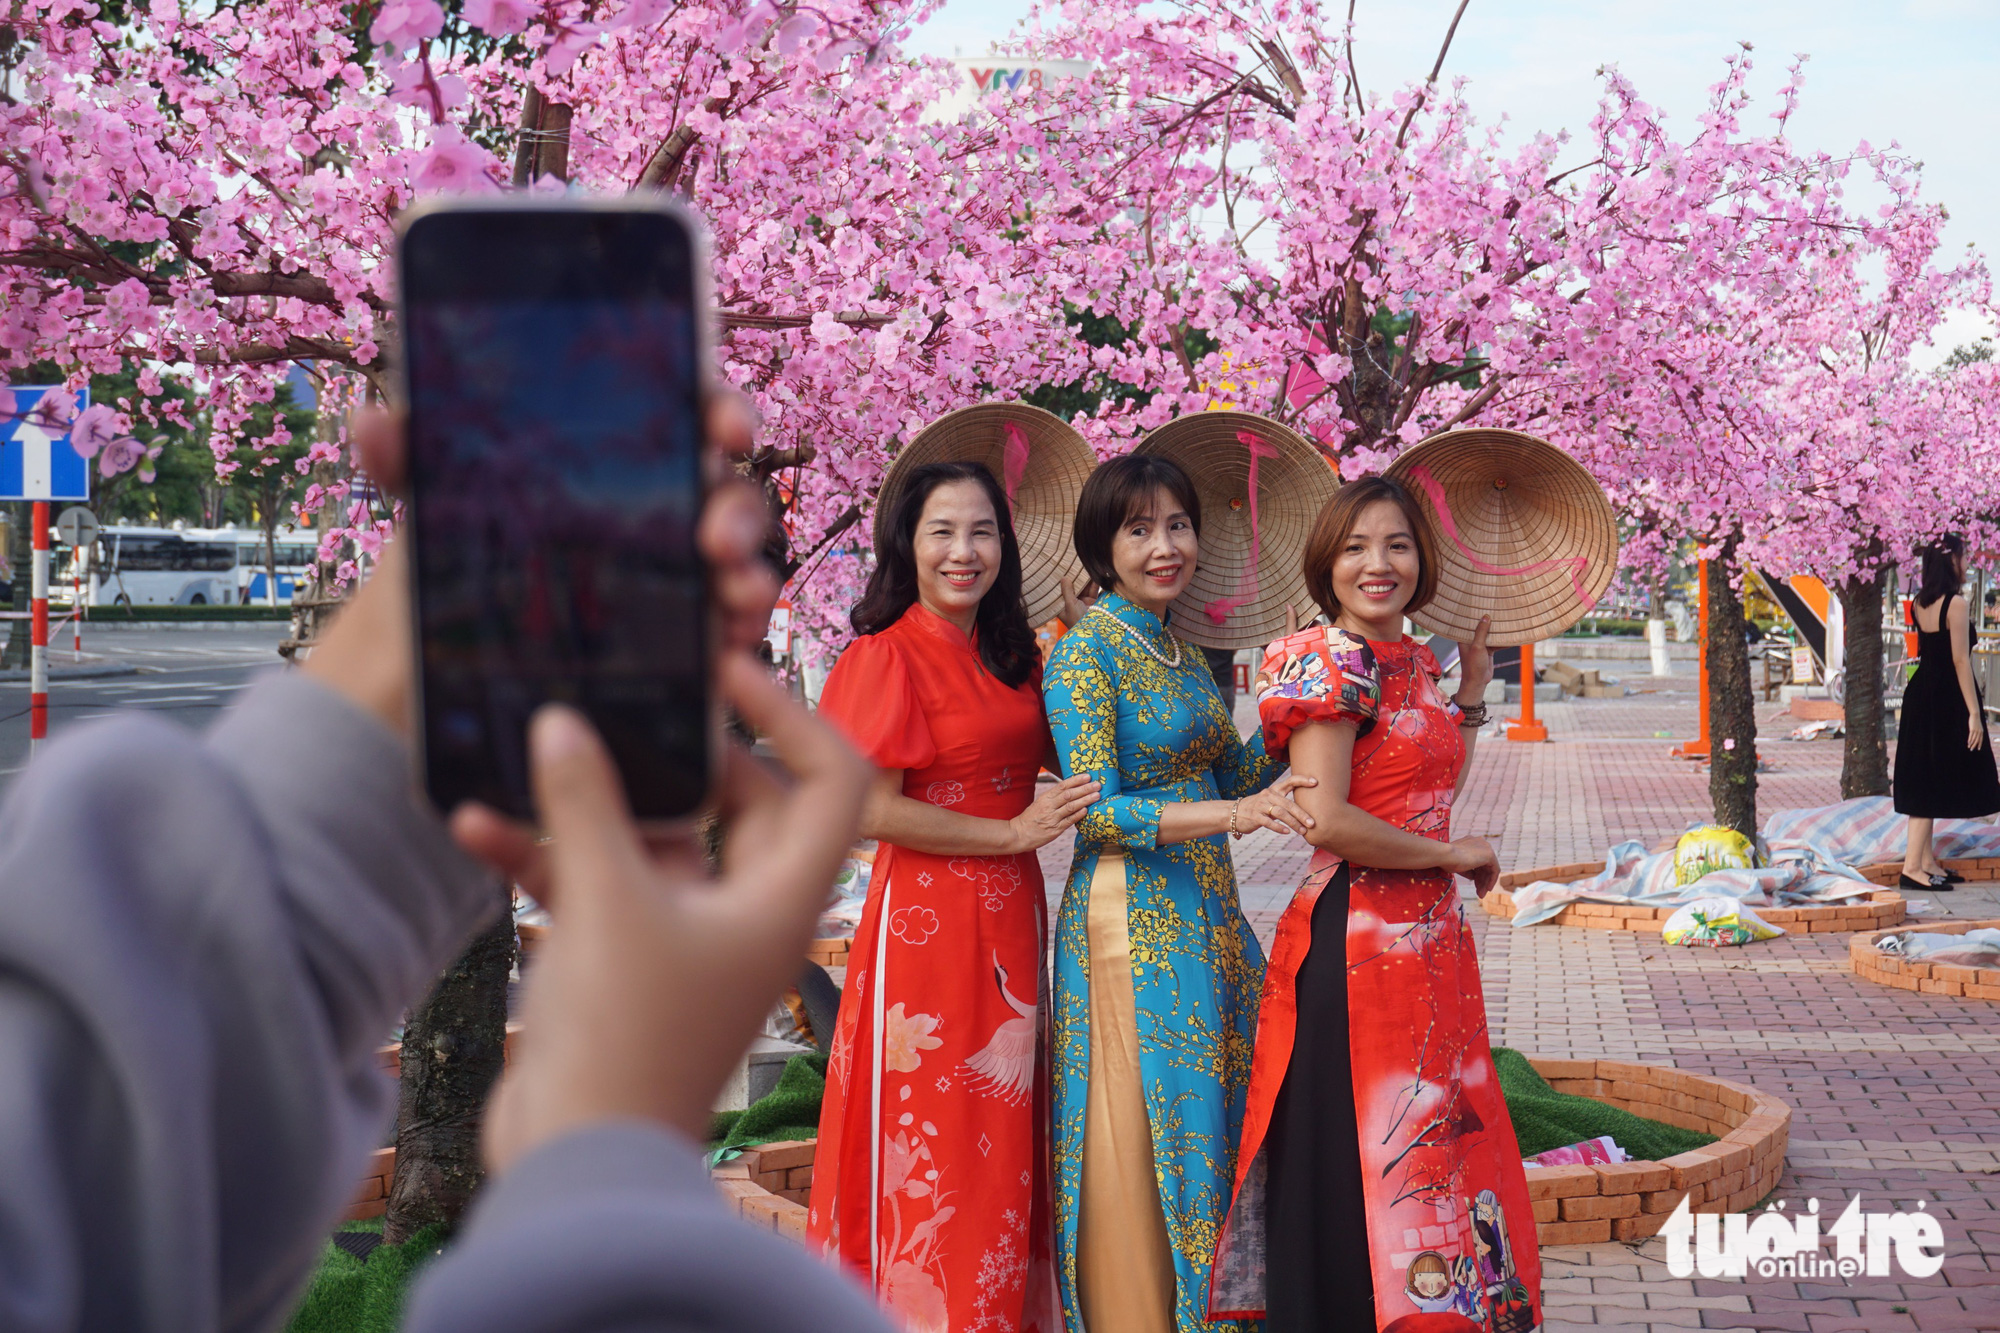 Rows of peach blossoms on a section of more than 40 meters have attracted many visitors. Photo: Doan Nhan / Tuoi Tre